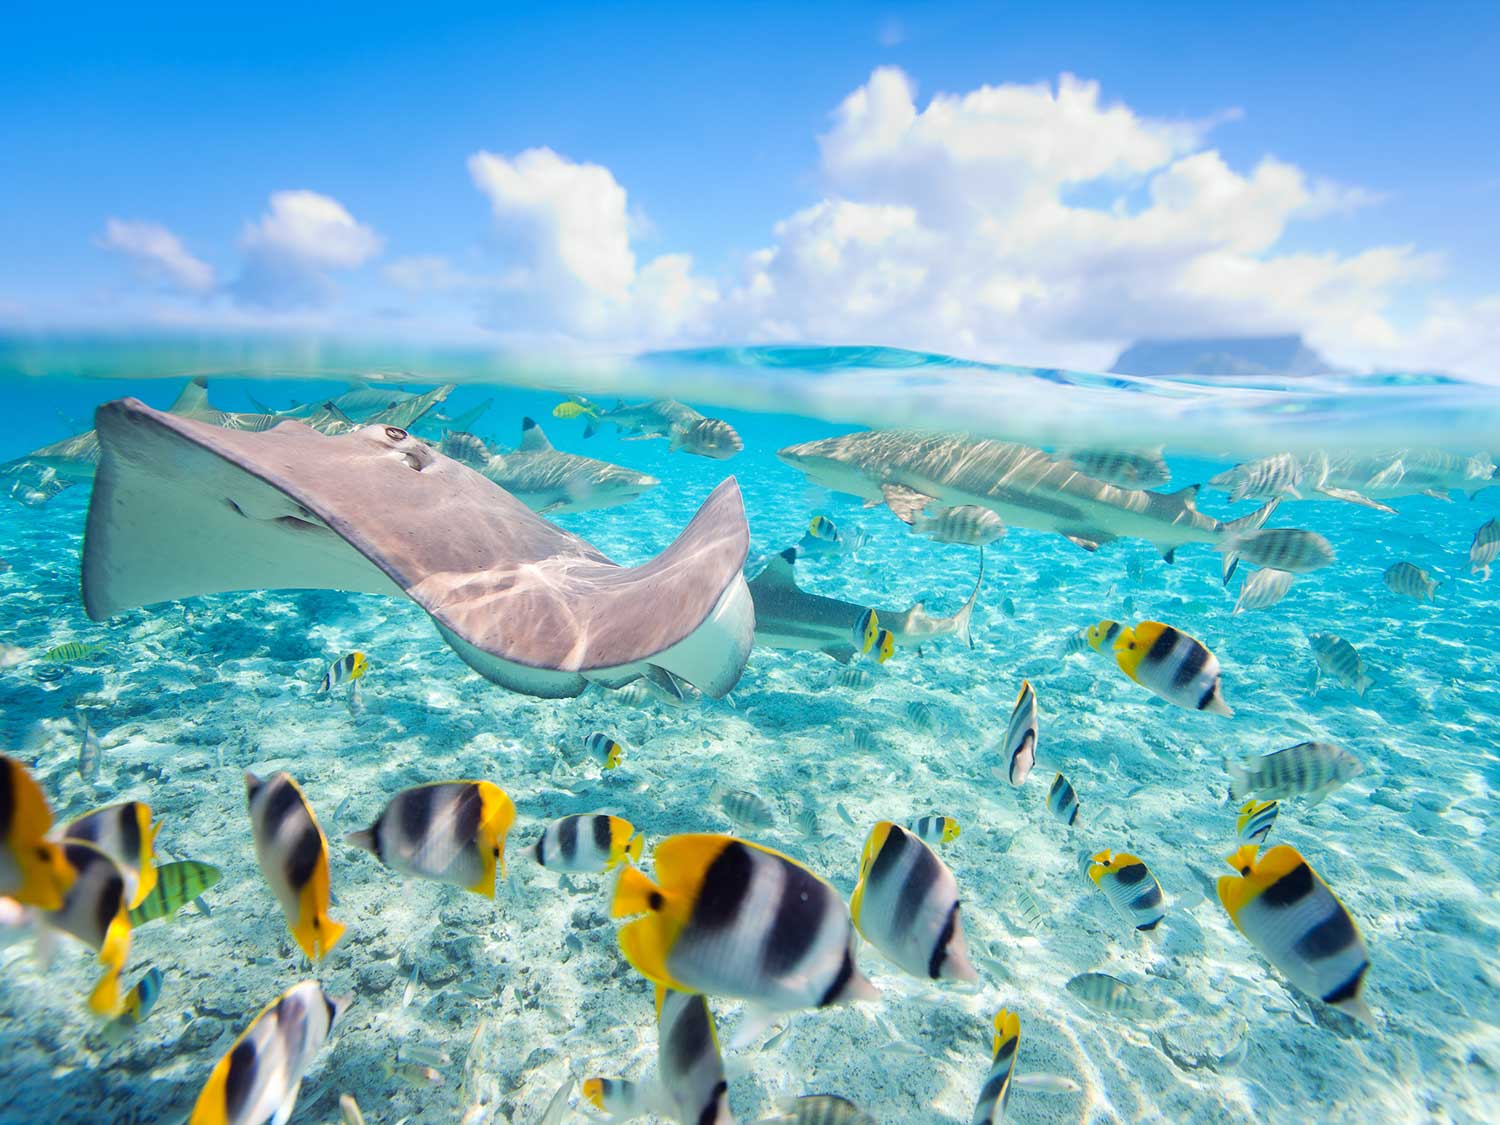 Rays and blacktip reef sharks